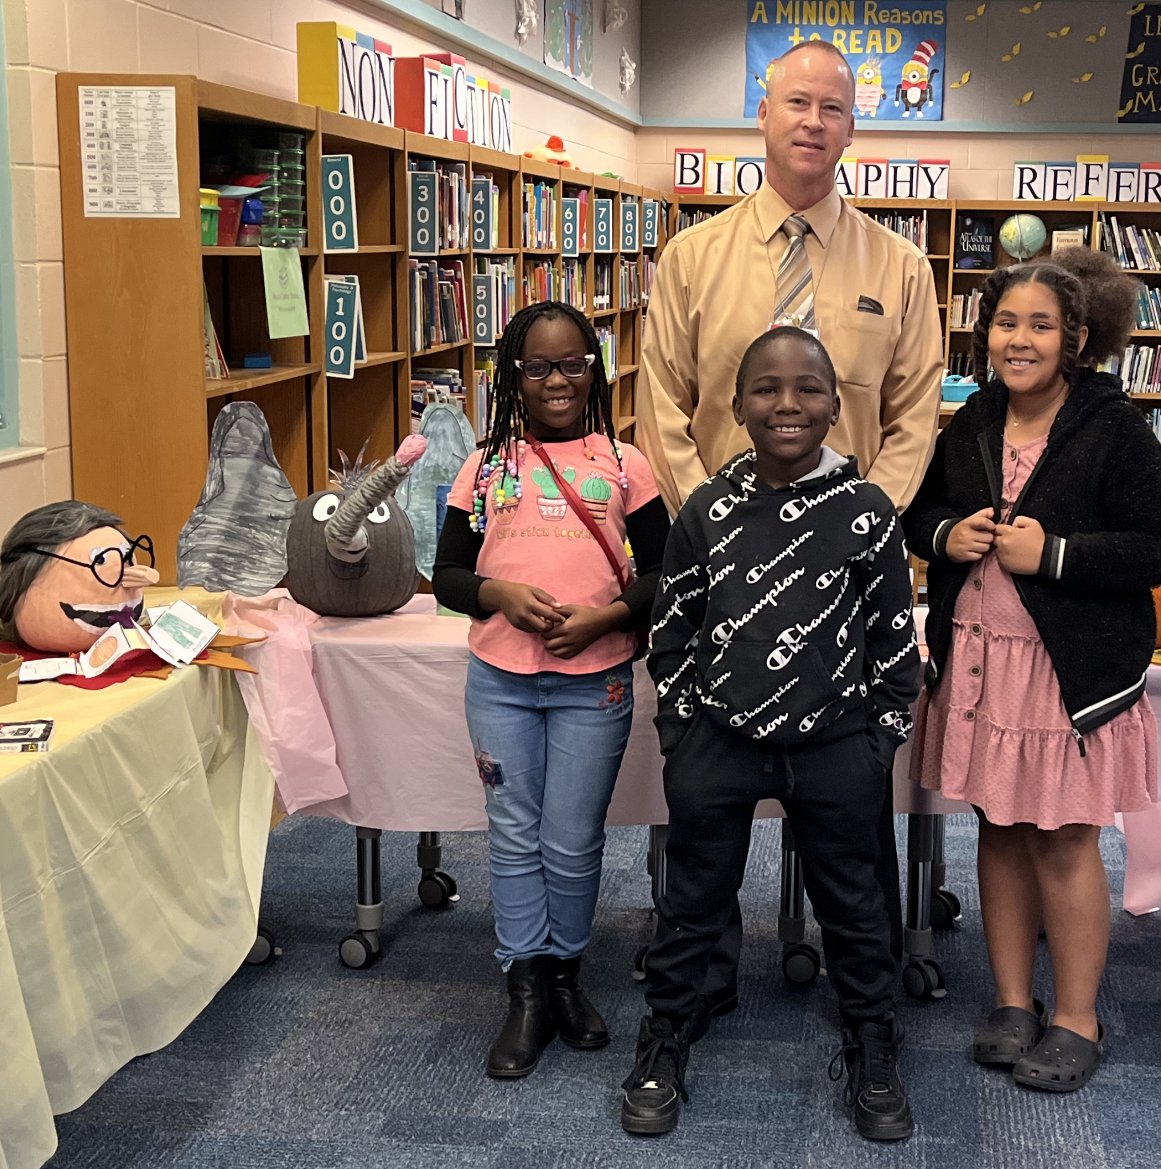 Superintendent Shane Andrew had the tough job of judging the pumpkin contest at Lake Forest Elementary this morning. The students created some amazing 'works of squash' based on book characters.